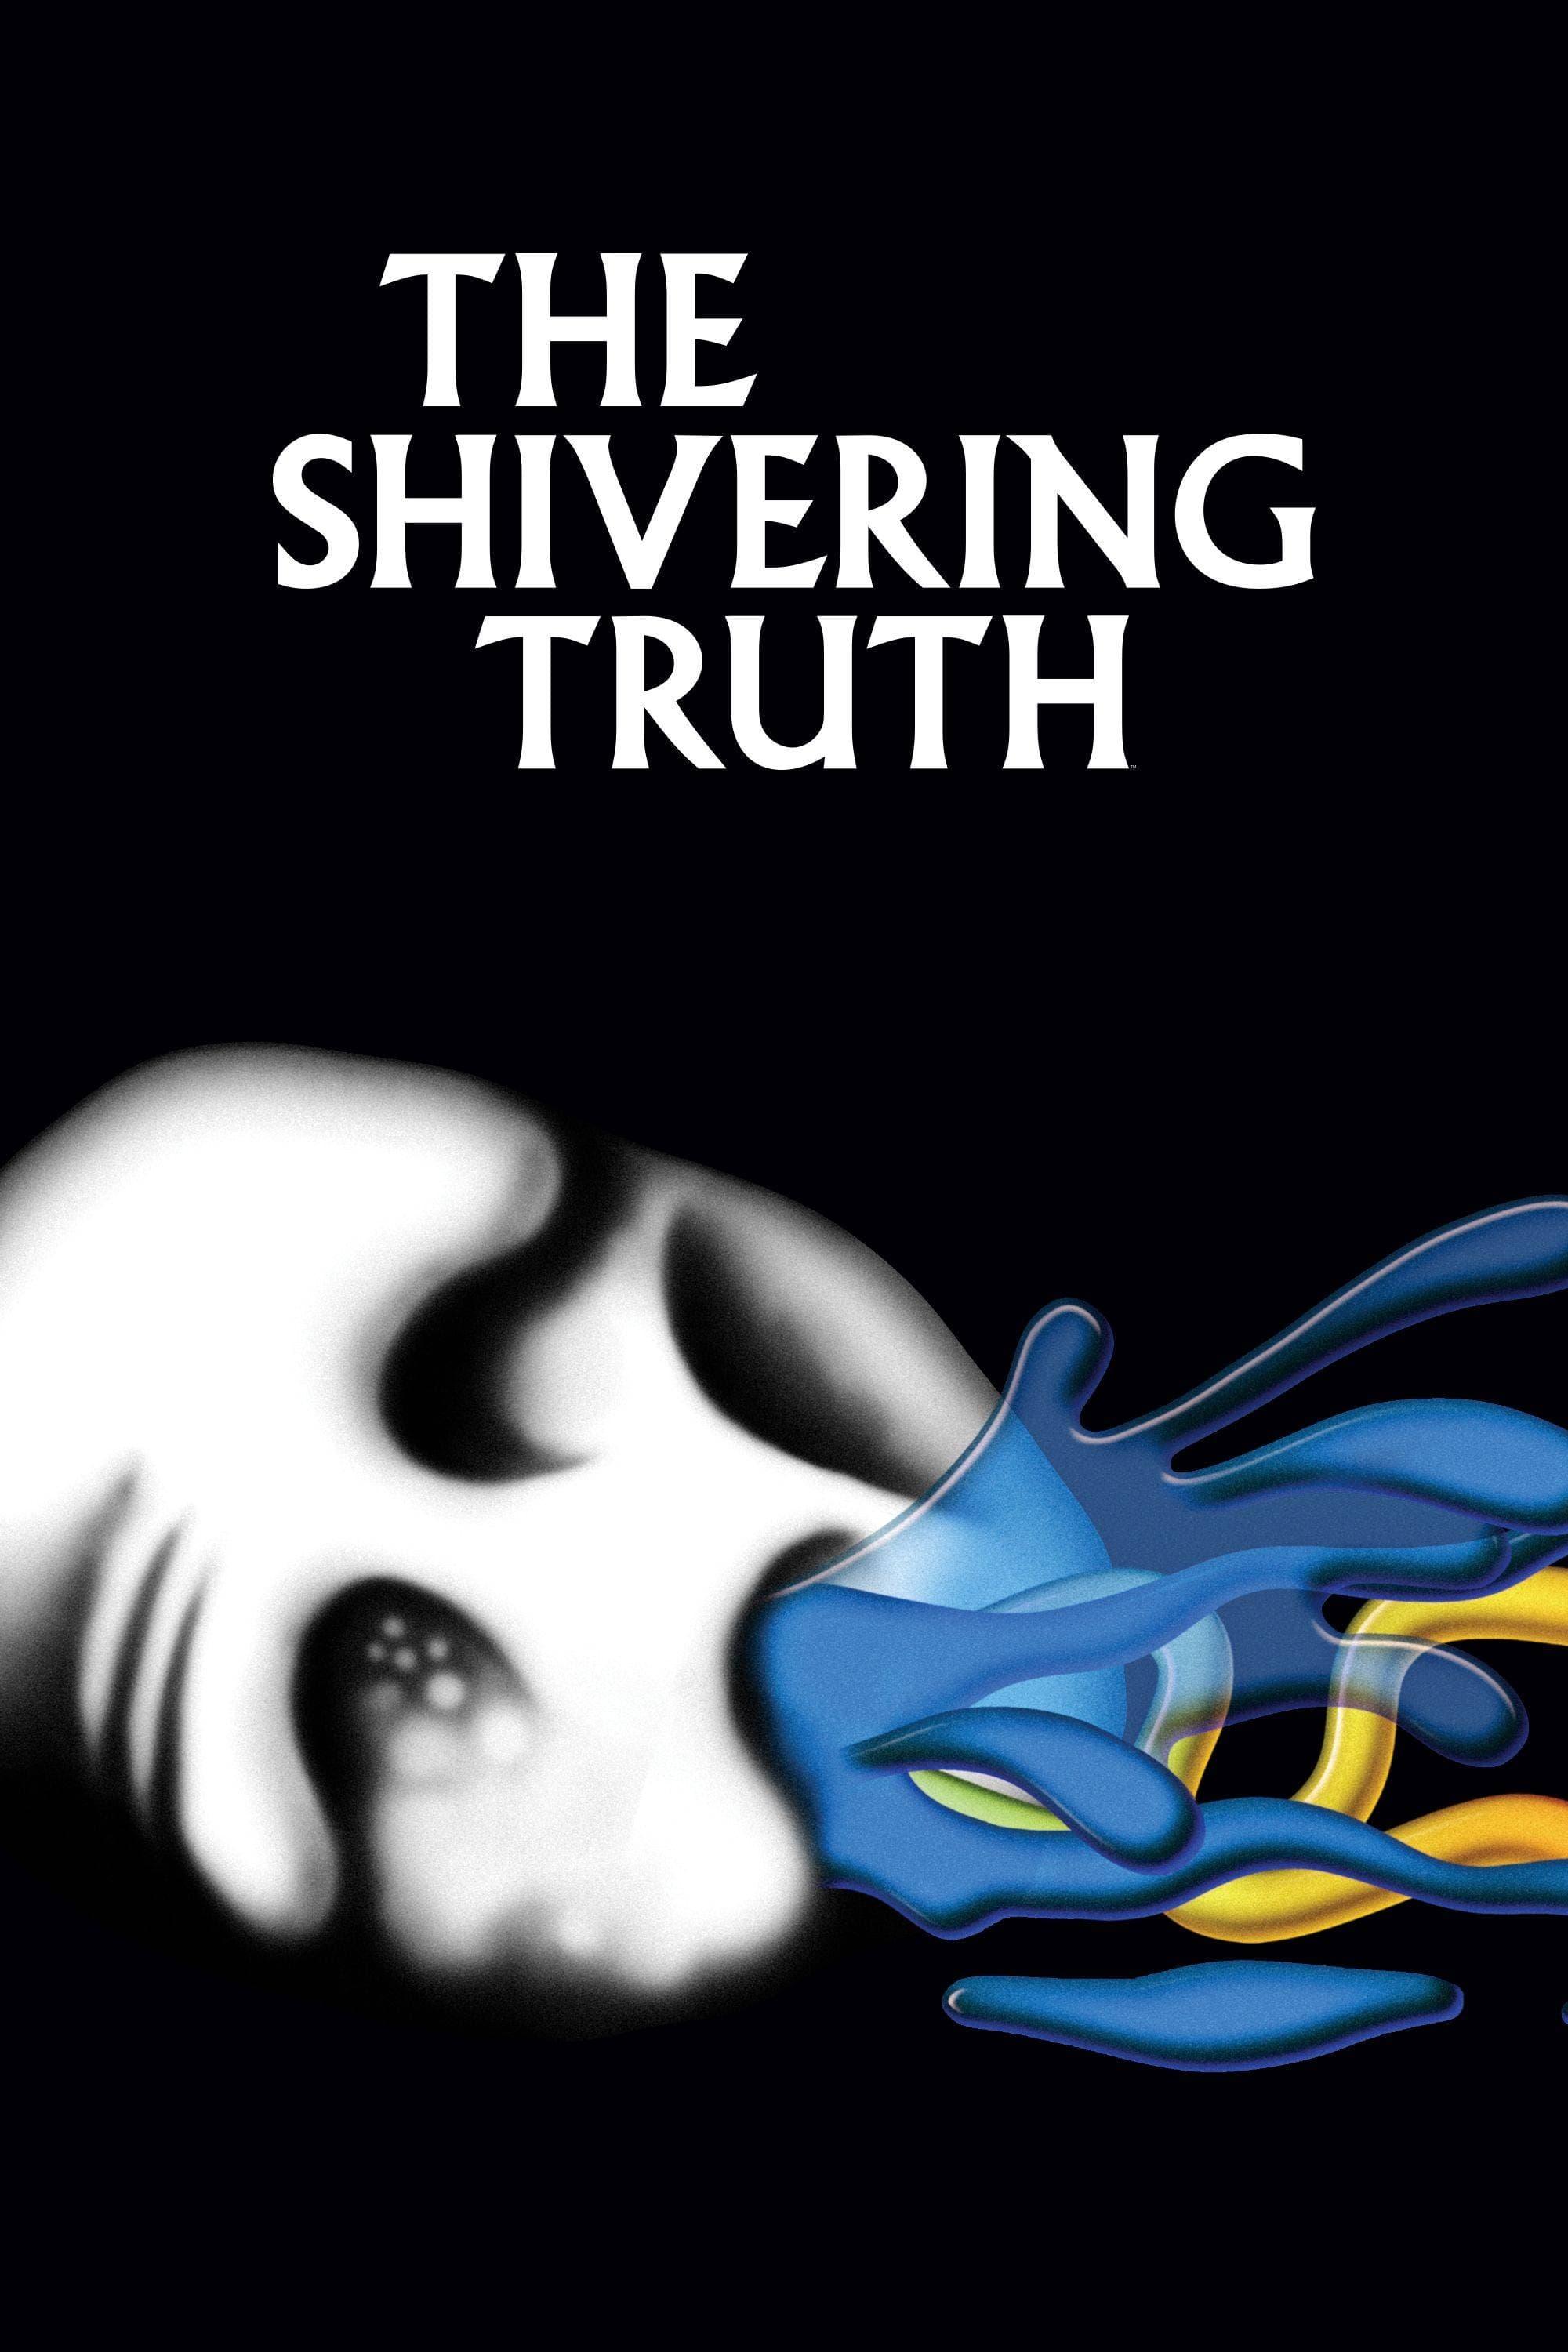 The Shivering Truth poster